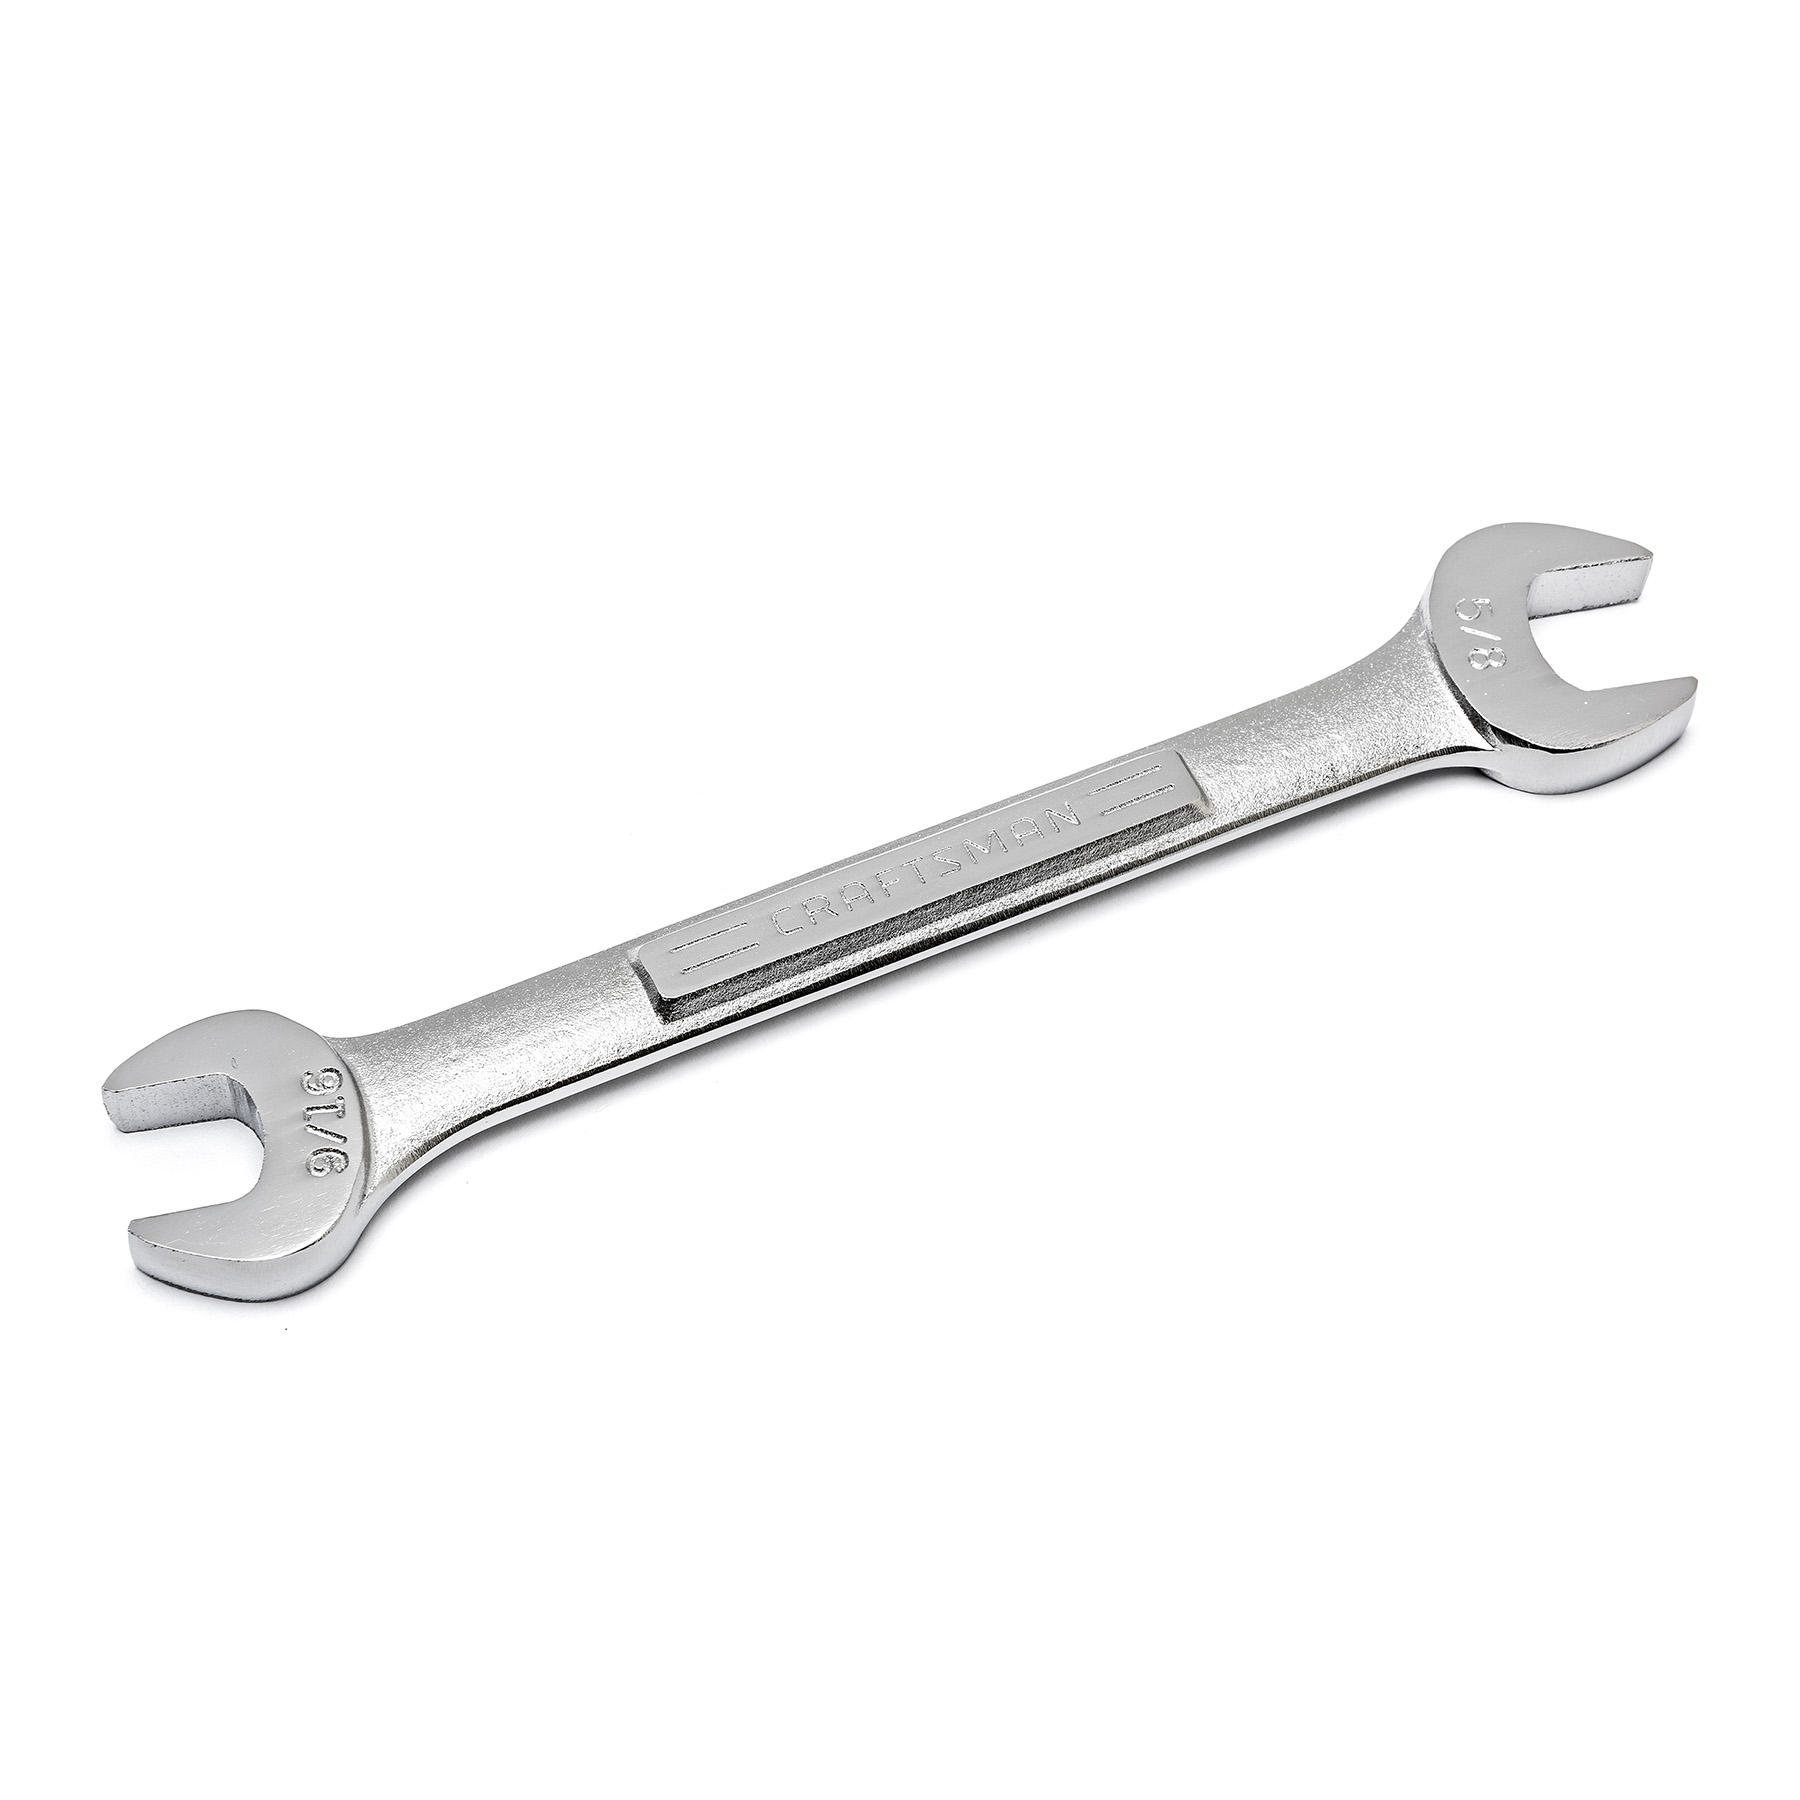 Craftsman 9/16" x 5/8" Open End Wrench